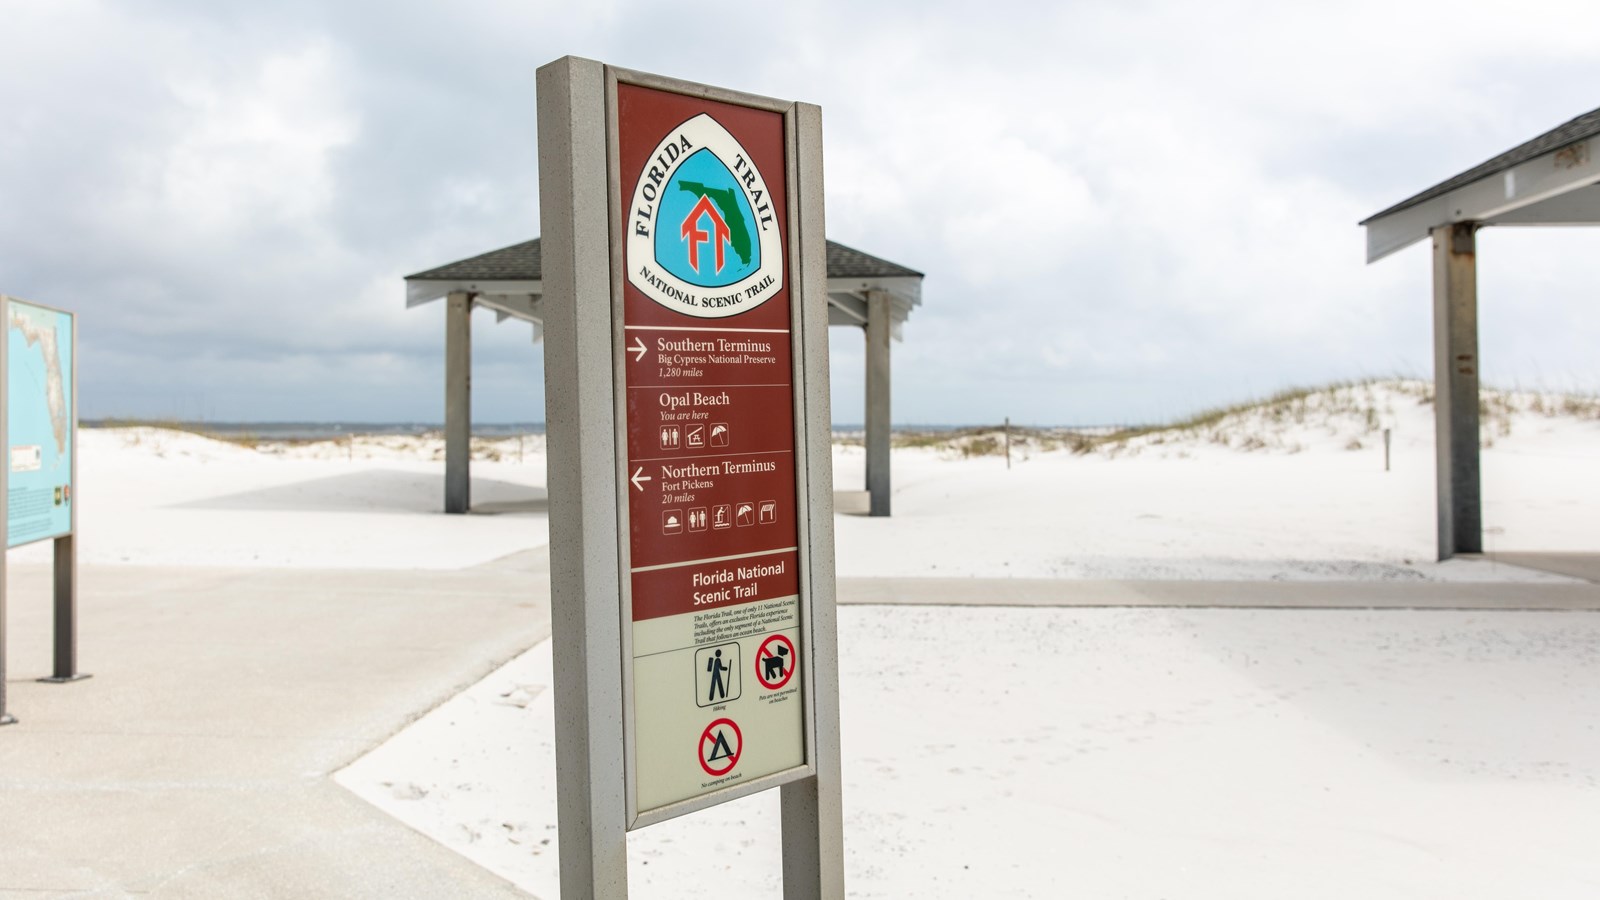 A sign for the Florida National Scenic Trail stands in front of pavilions at the beach.